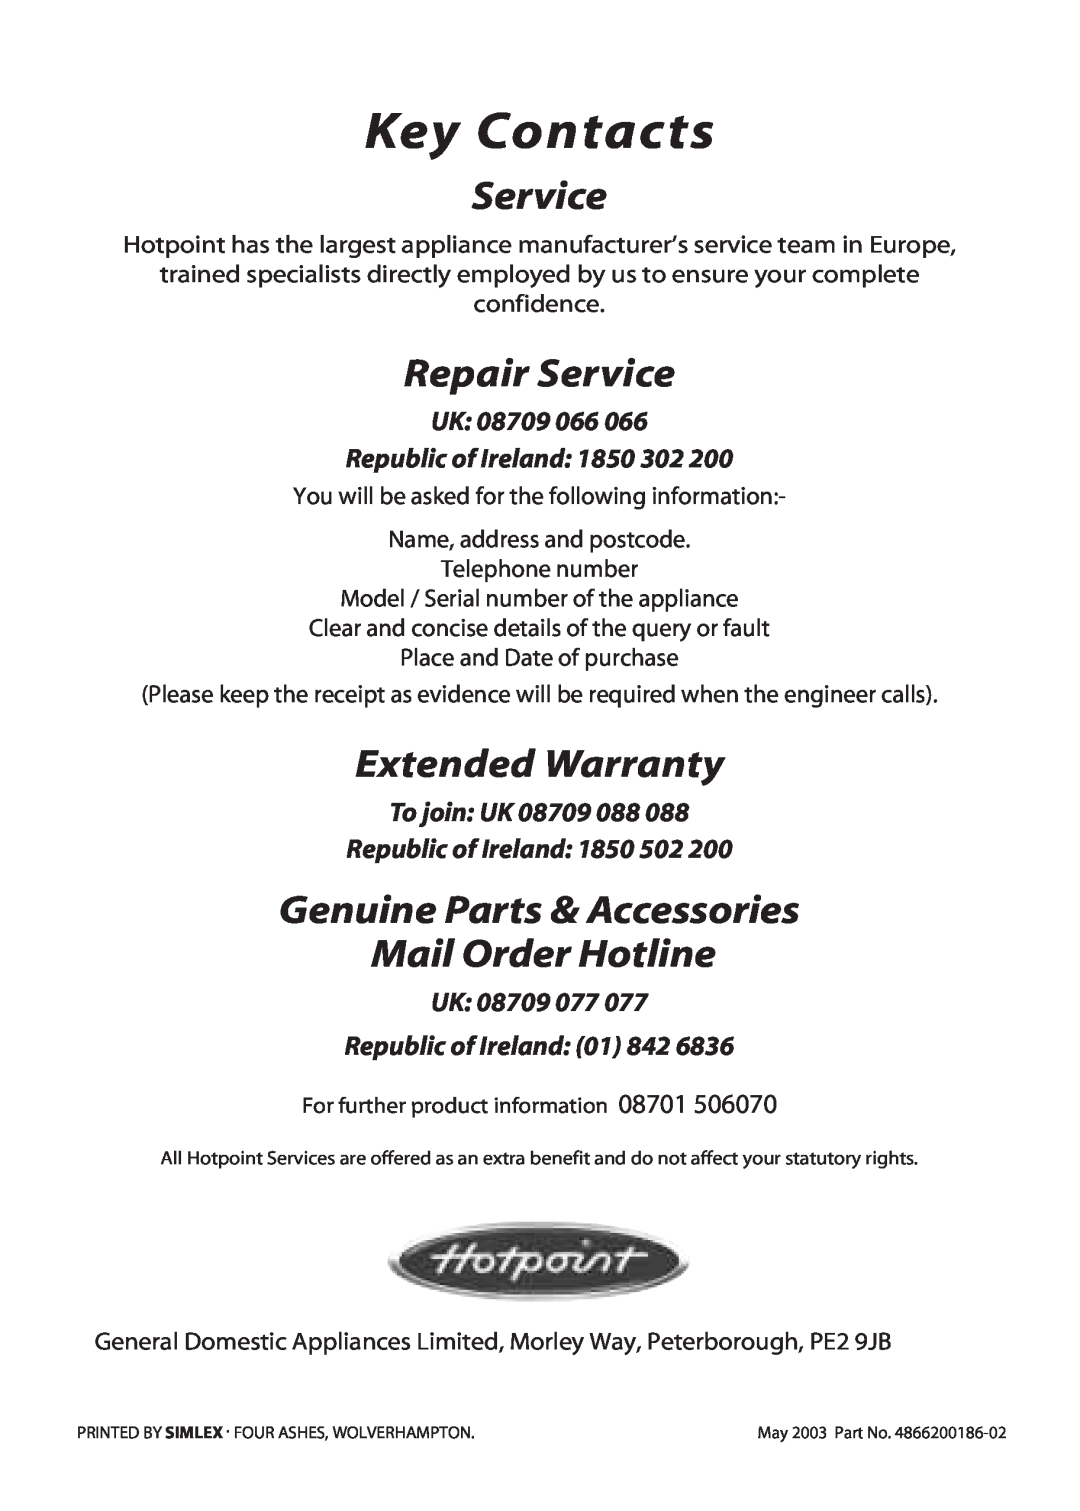 Hotpoint UT47, UD47 Key Contacts, Repair Service, Extended Warranty, Genuine Parts & Accessories Mail Order Hotline 